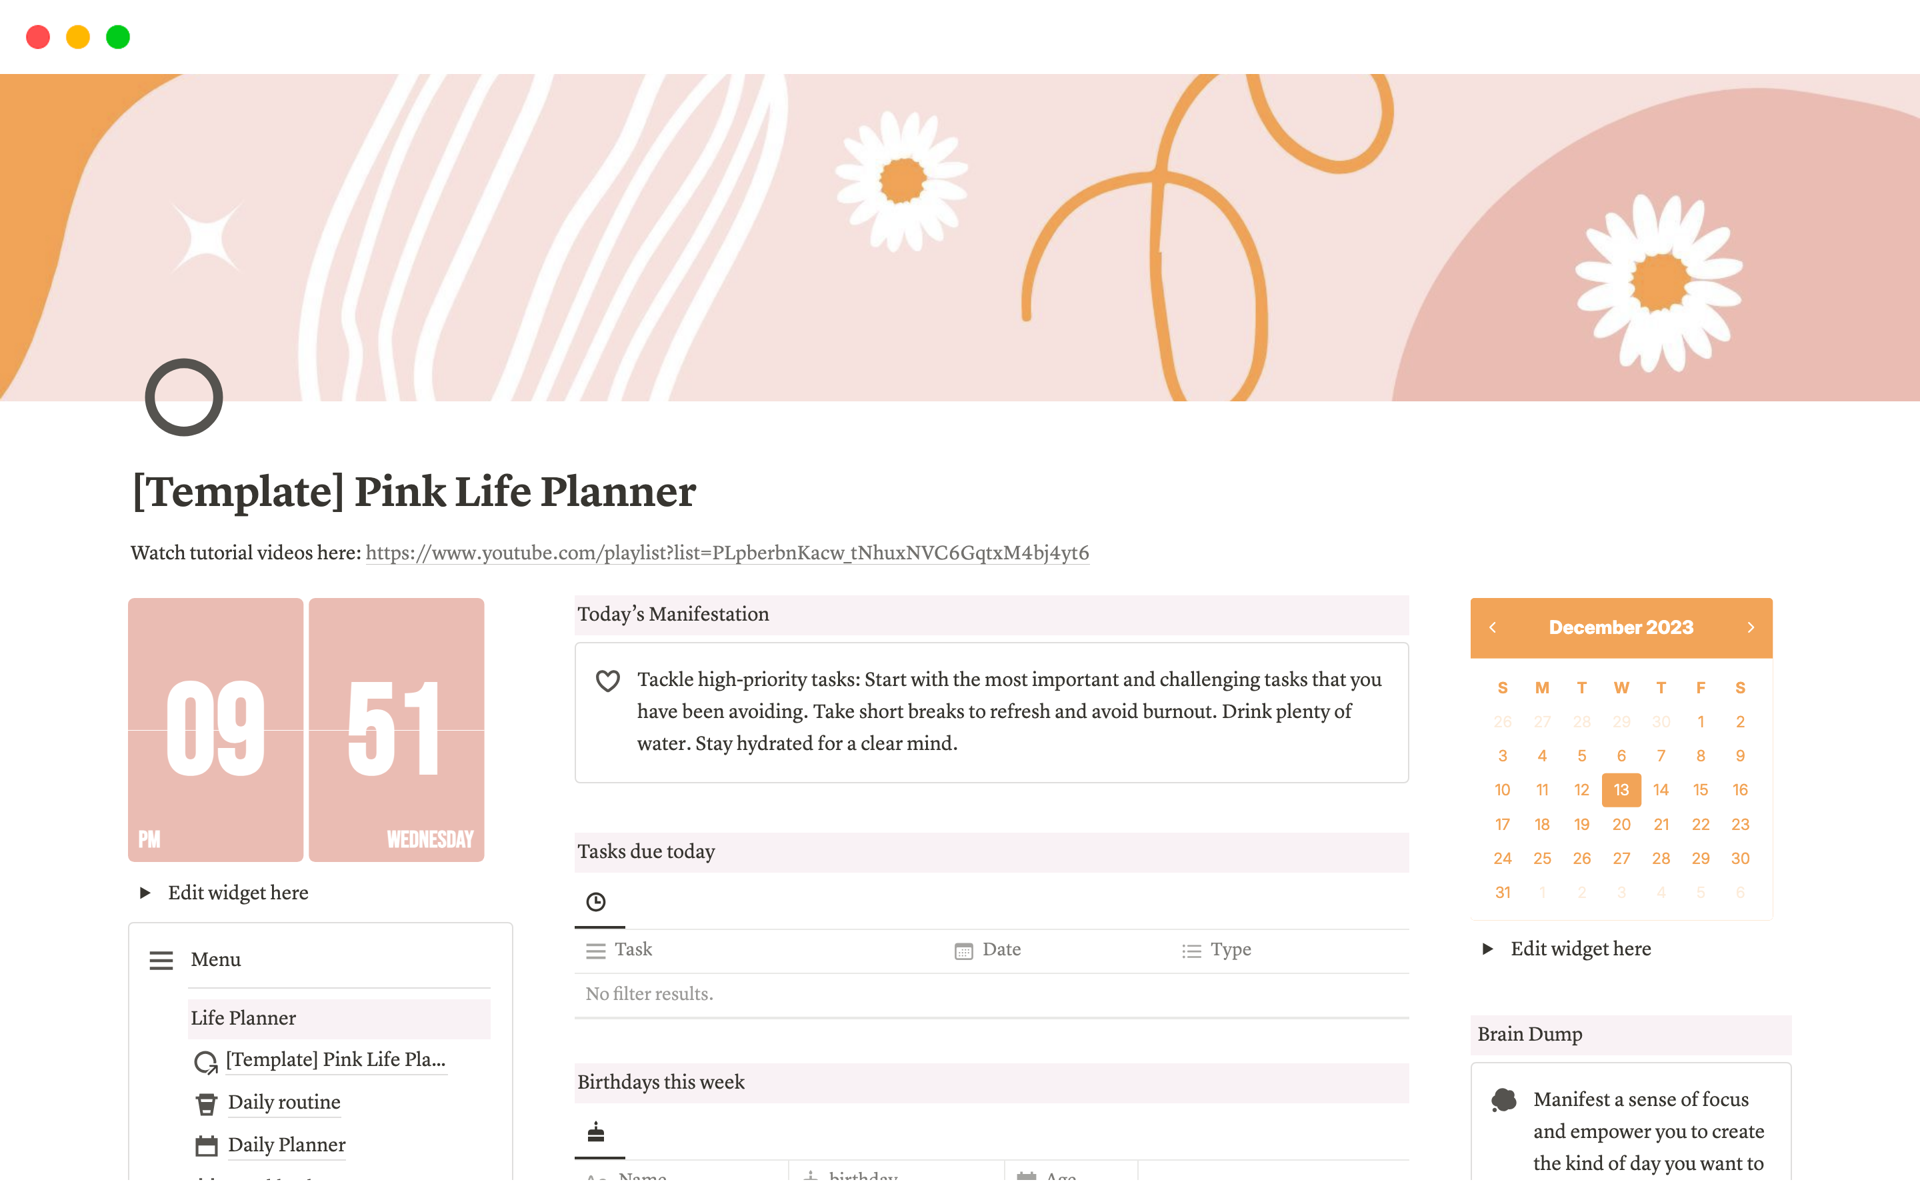 Organise your life in style with the ultimate Notion Life Planner Template. A bright pink and orange notion aesthetic serves as a one-stop dashboard helping you navigate planning, tracking, and goal setting all in one location.